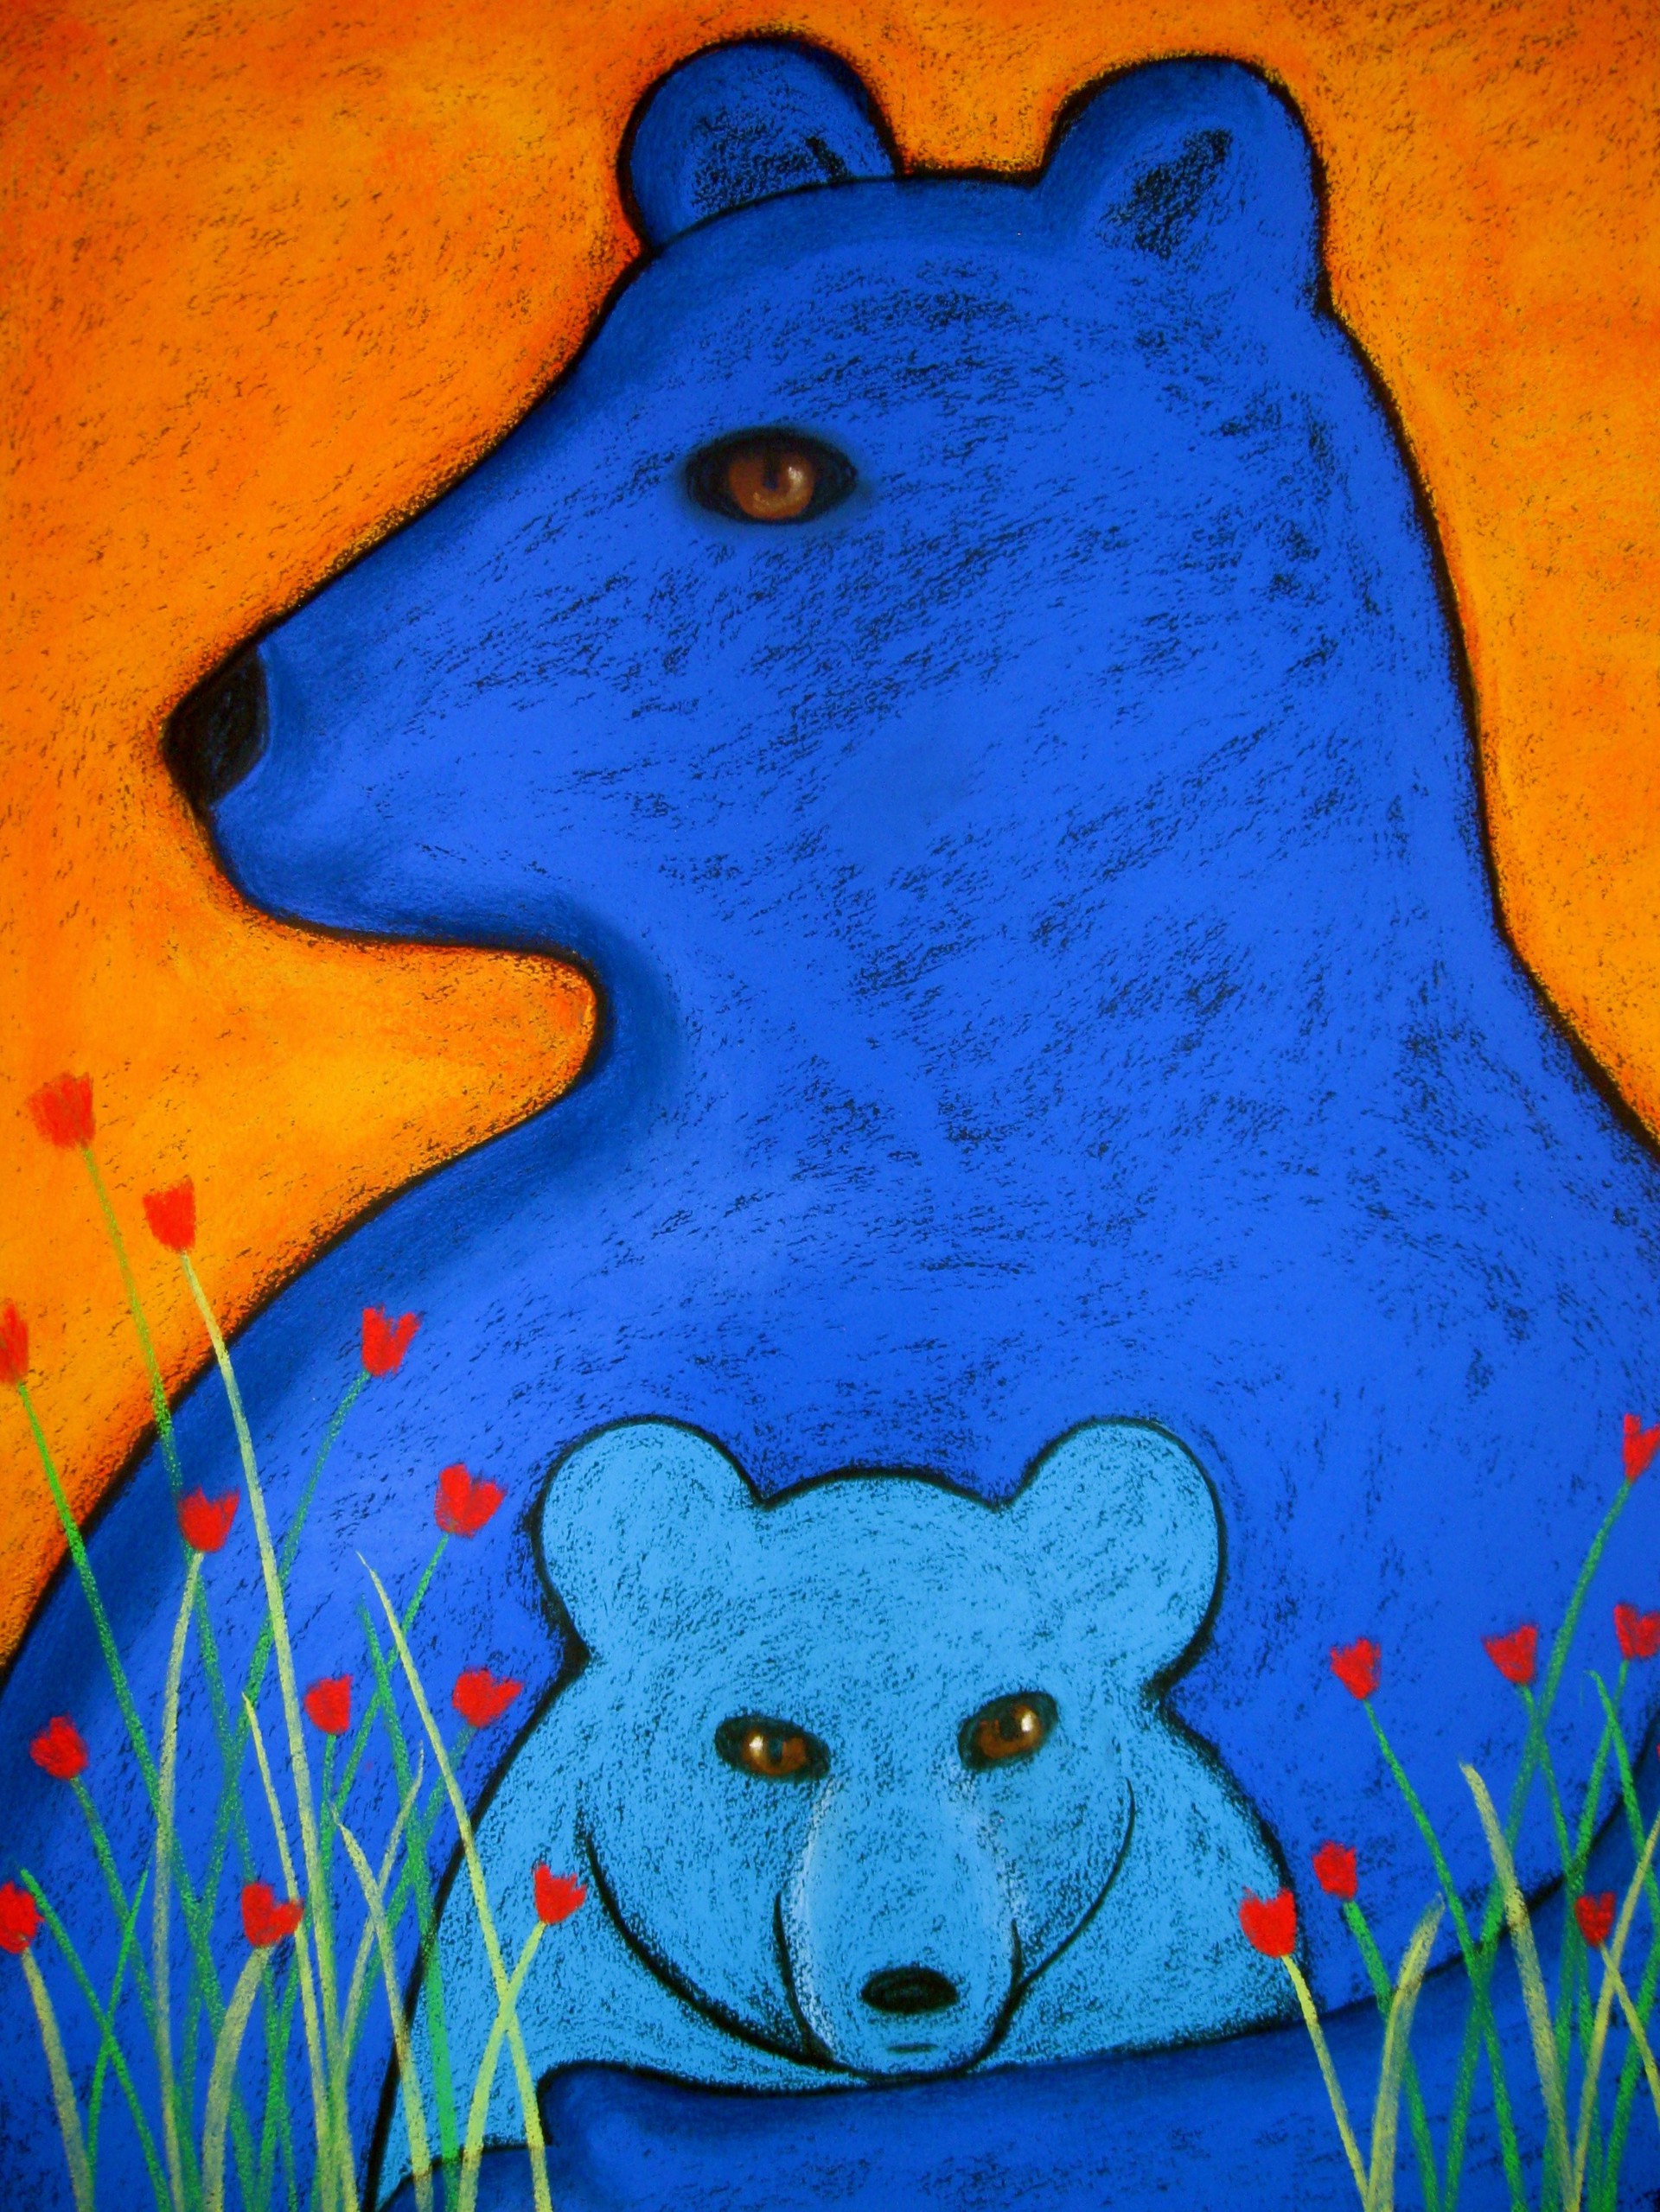 Papa Bear - SOLD available for commission by Carole LaRoche